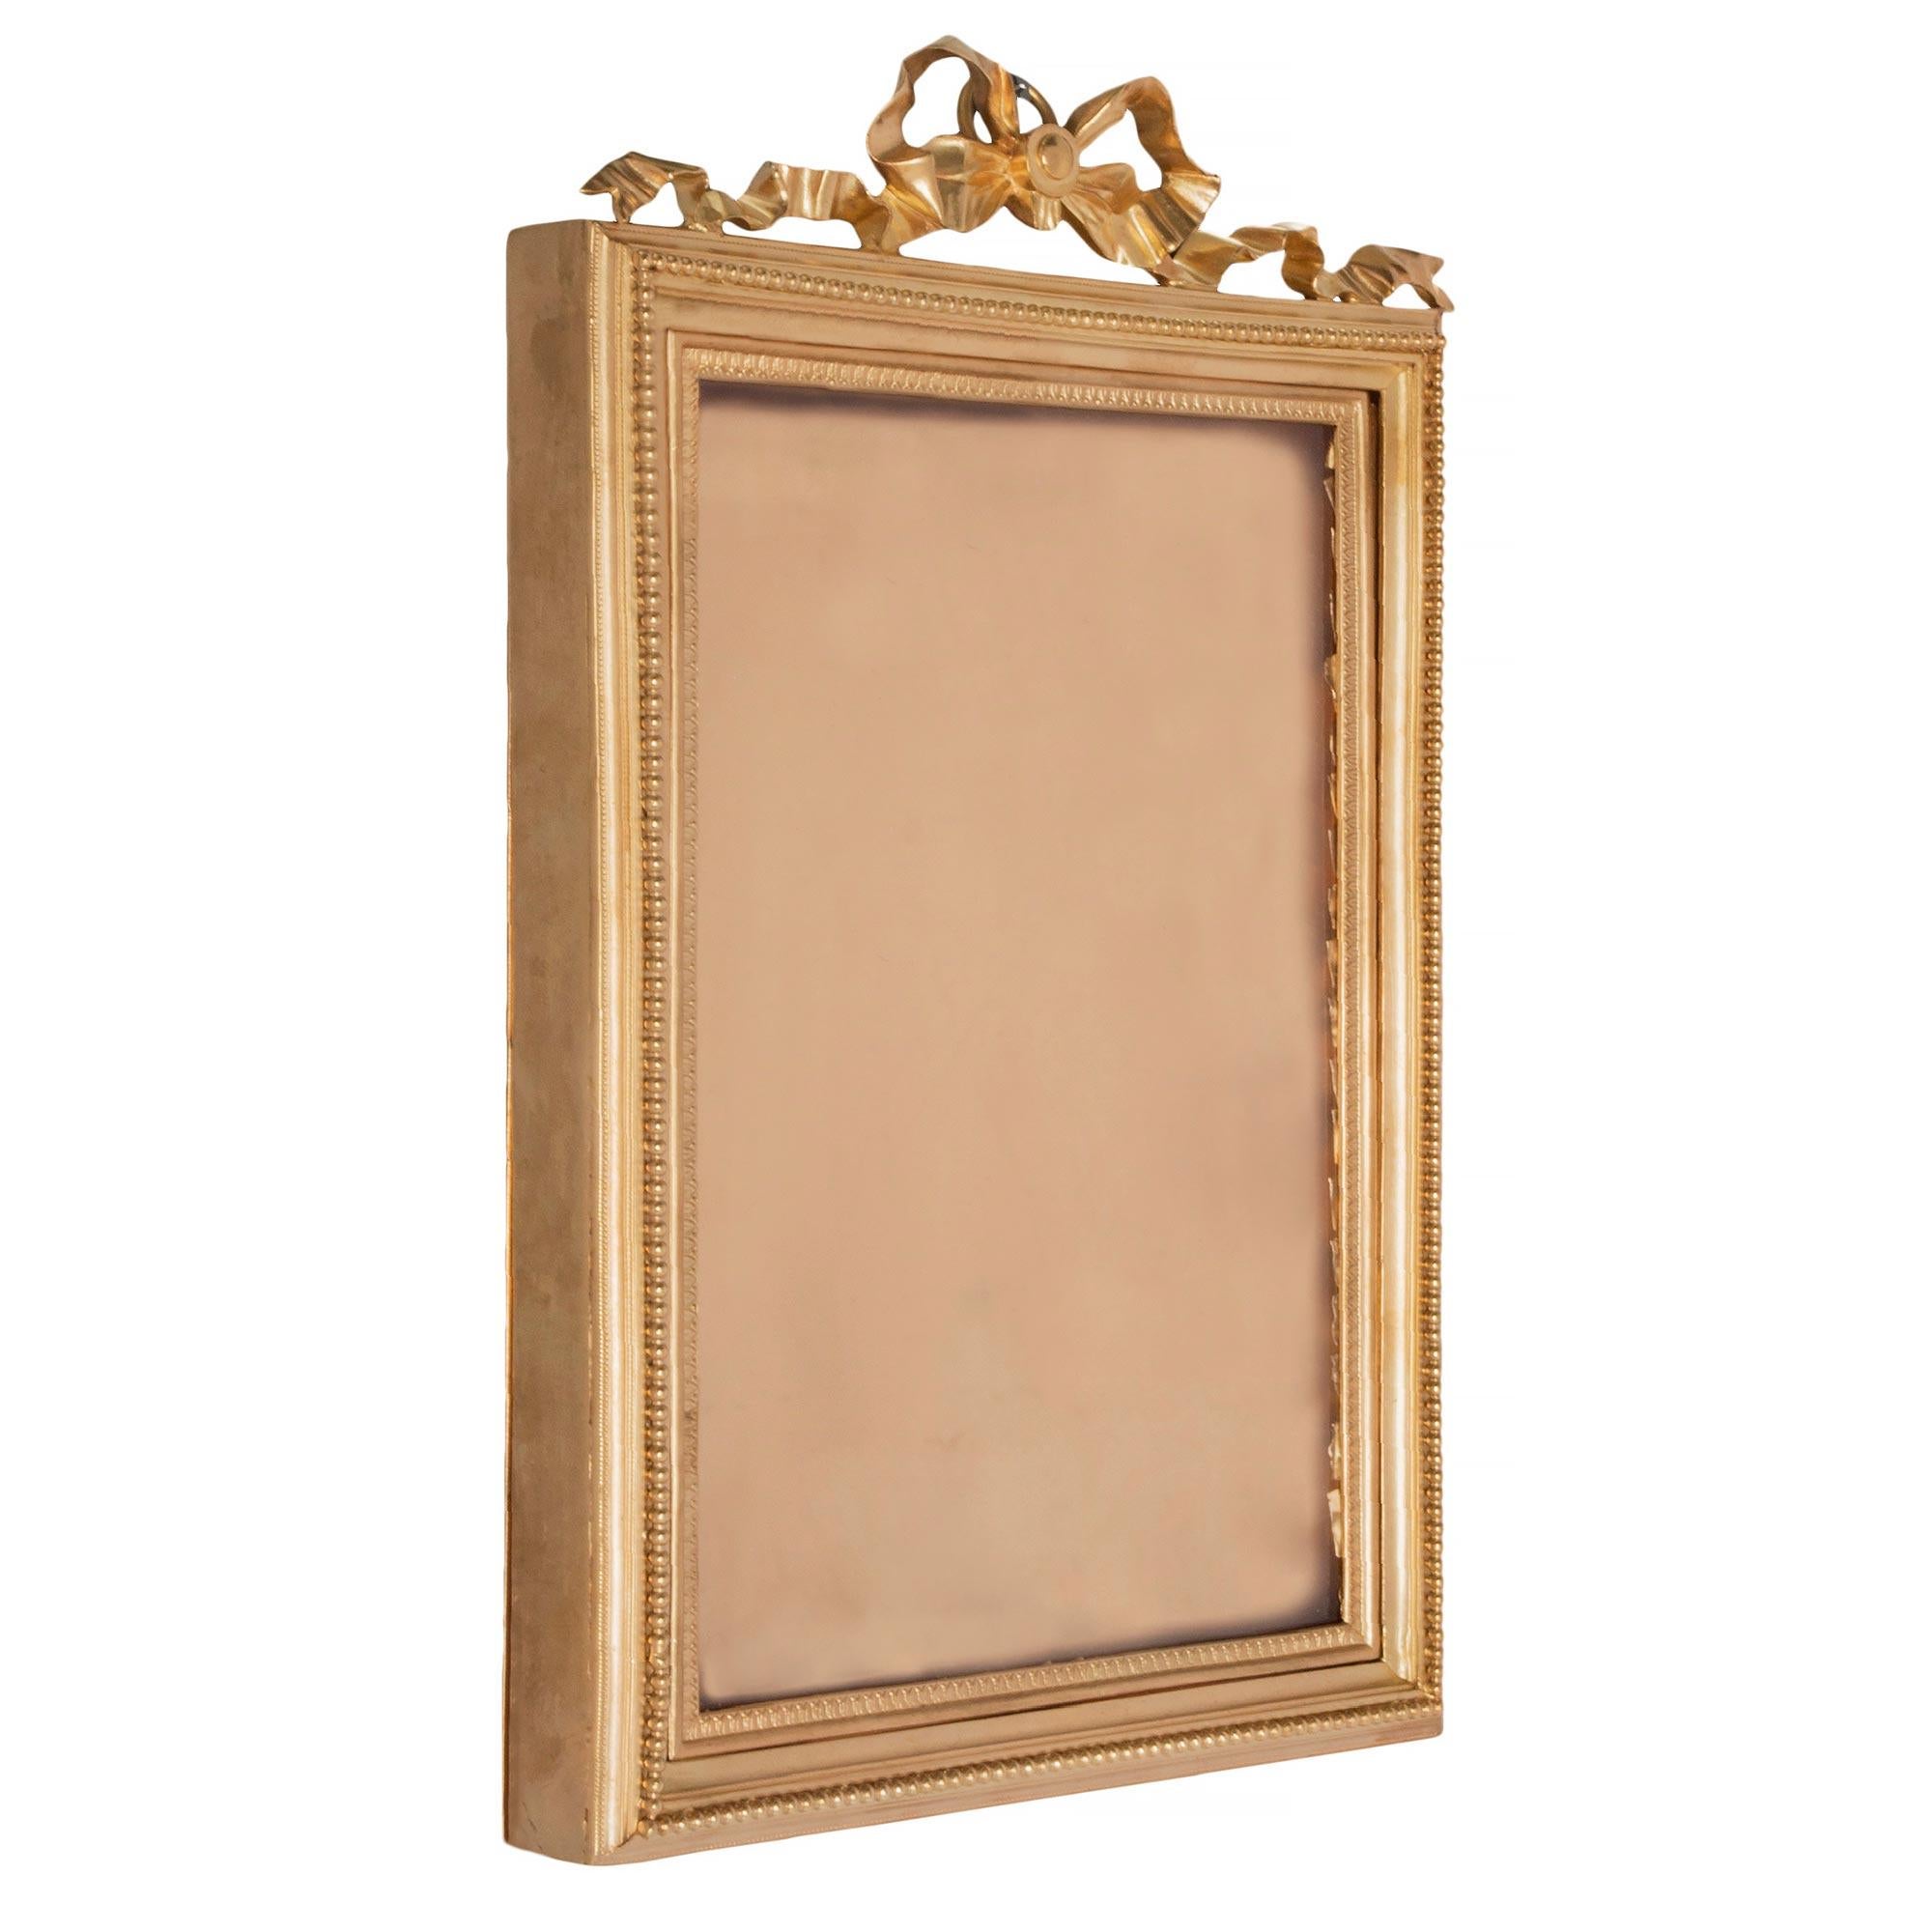 An elegant French 19th century Louis XVI st. ormolu frame. The rectangular frame displays its original glass pane framed within a finely chased Coeur de Rai pattern and beaded design. At the top is a charming and most attractive flowing tied ribbon.